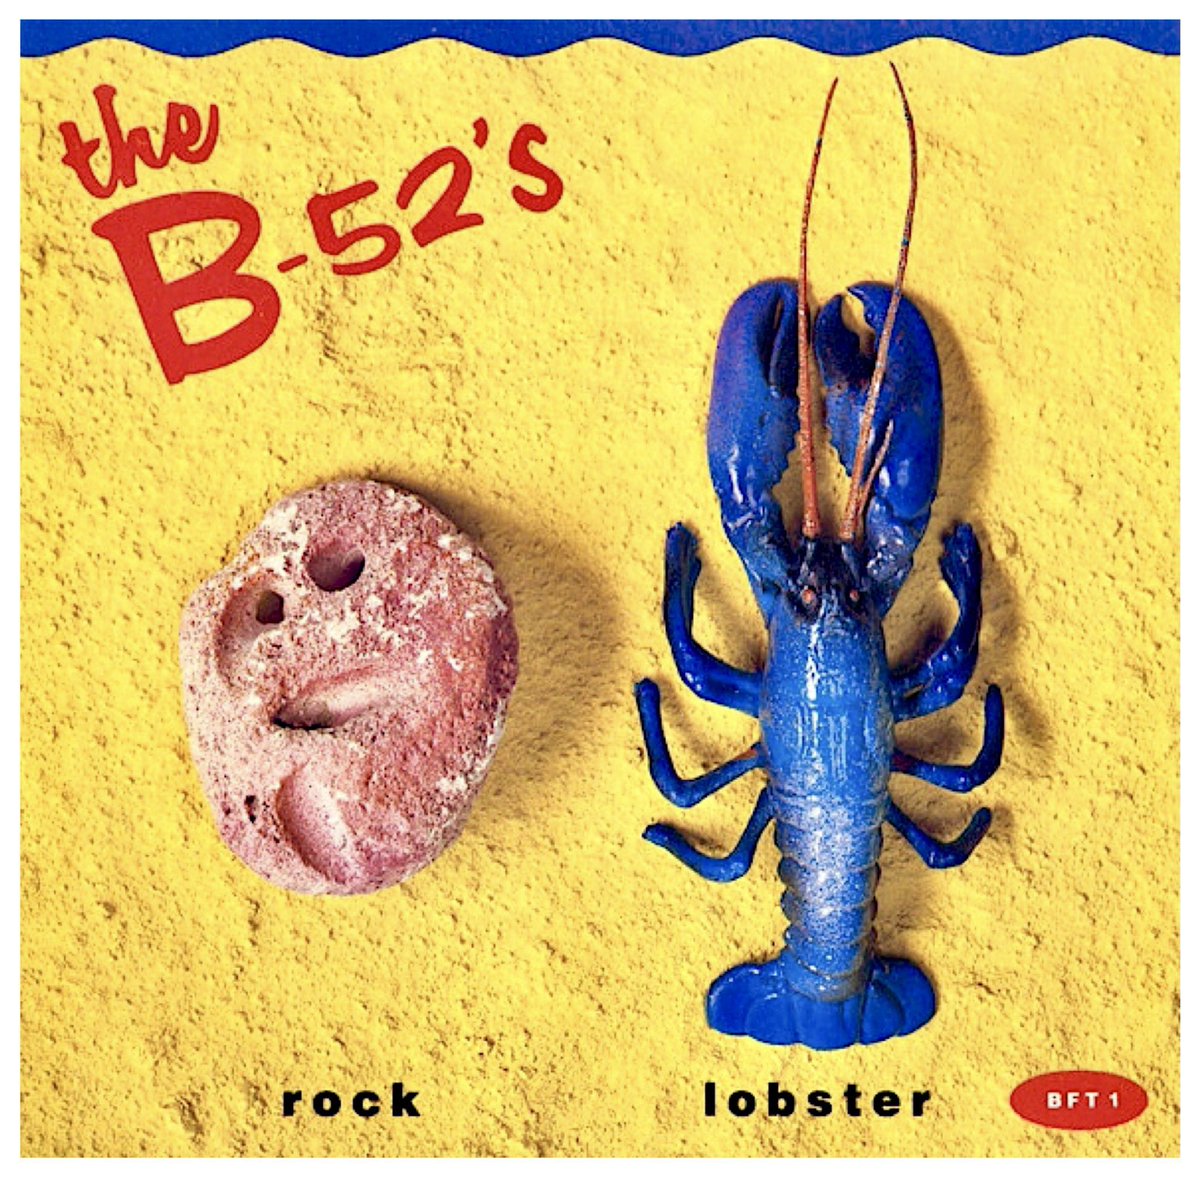 🎶The B-52’s released ‘Rock Lobster’ 46 years ago, April 30, 1978